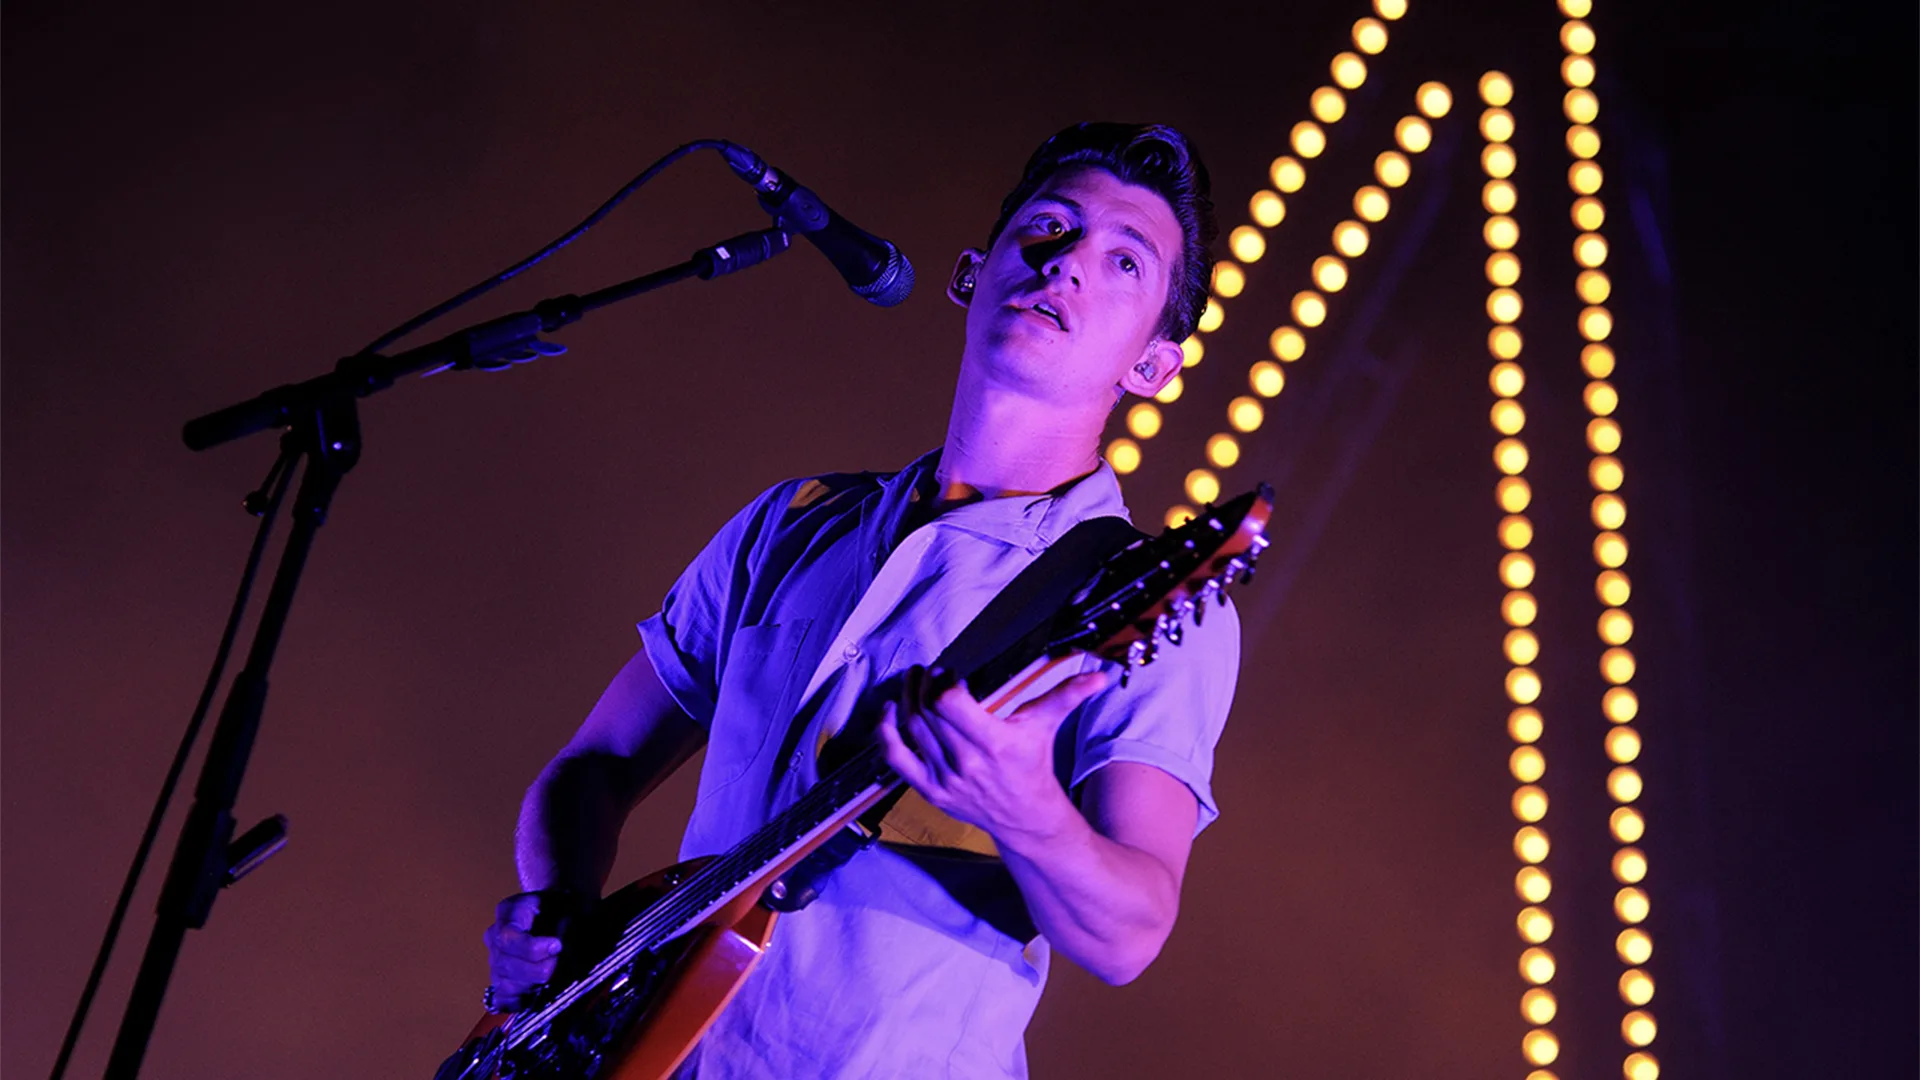 Arctic Monkeys frontman performing a gig